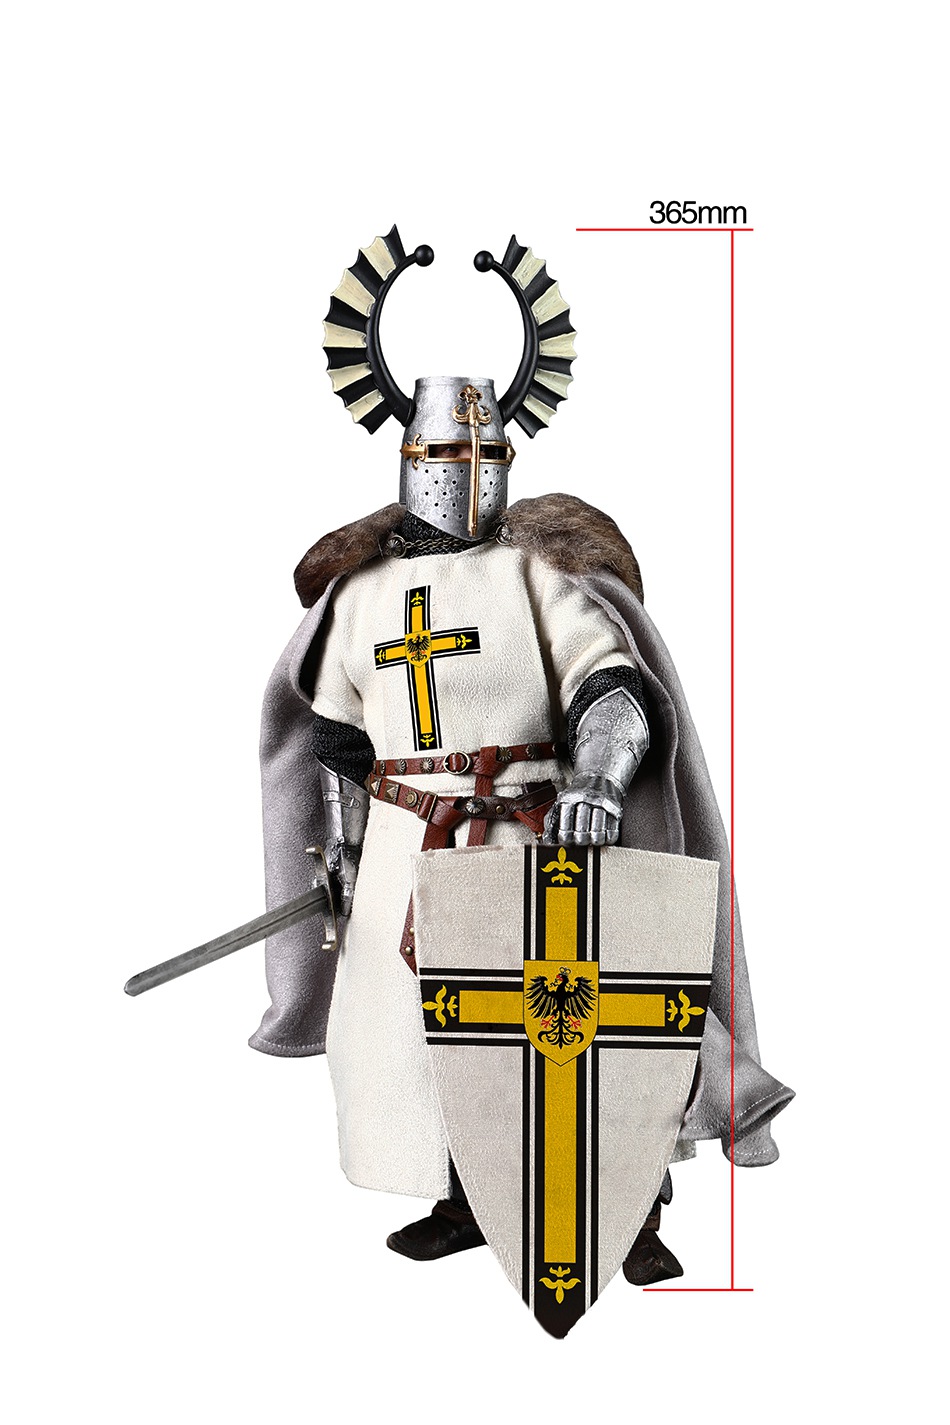 NEW PRODUCT: Fire Phoenix: 1/6 die-cast alloy St. John’s Hospital Knight/Teutonic Knight and suit #FP001/FP002 17555910